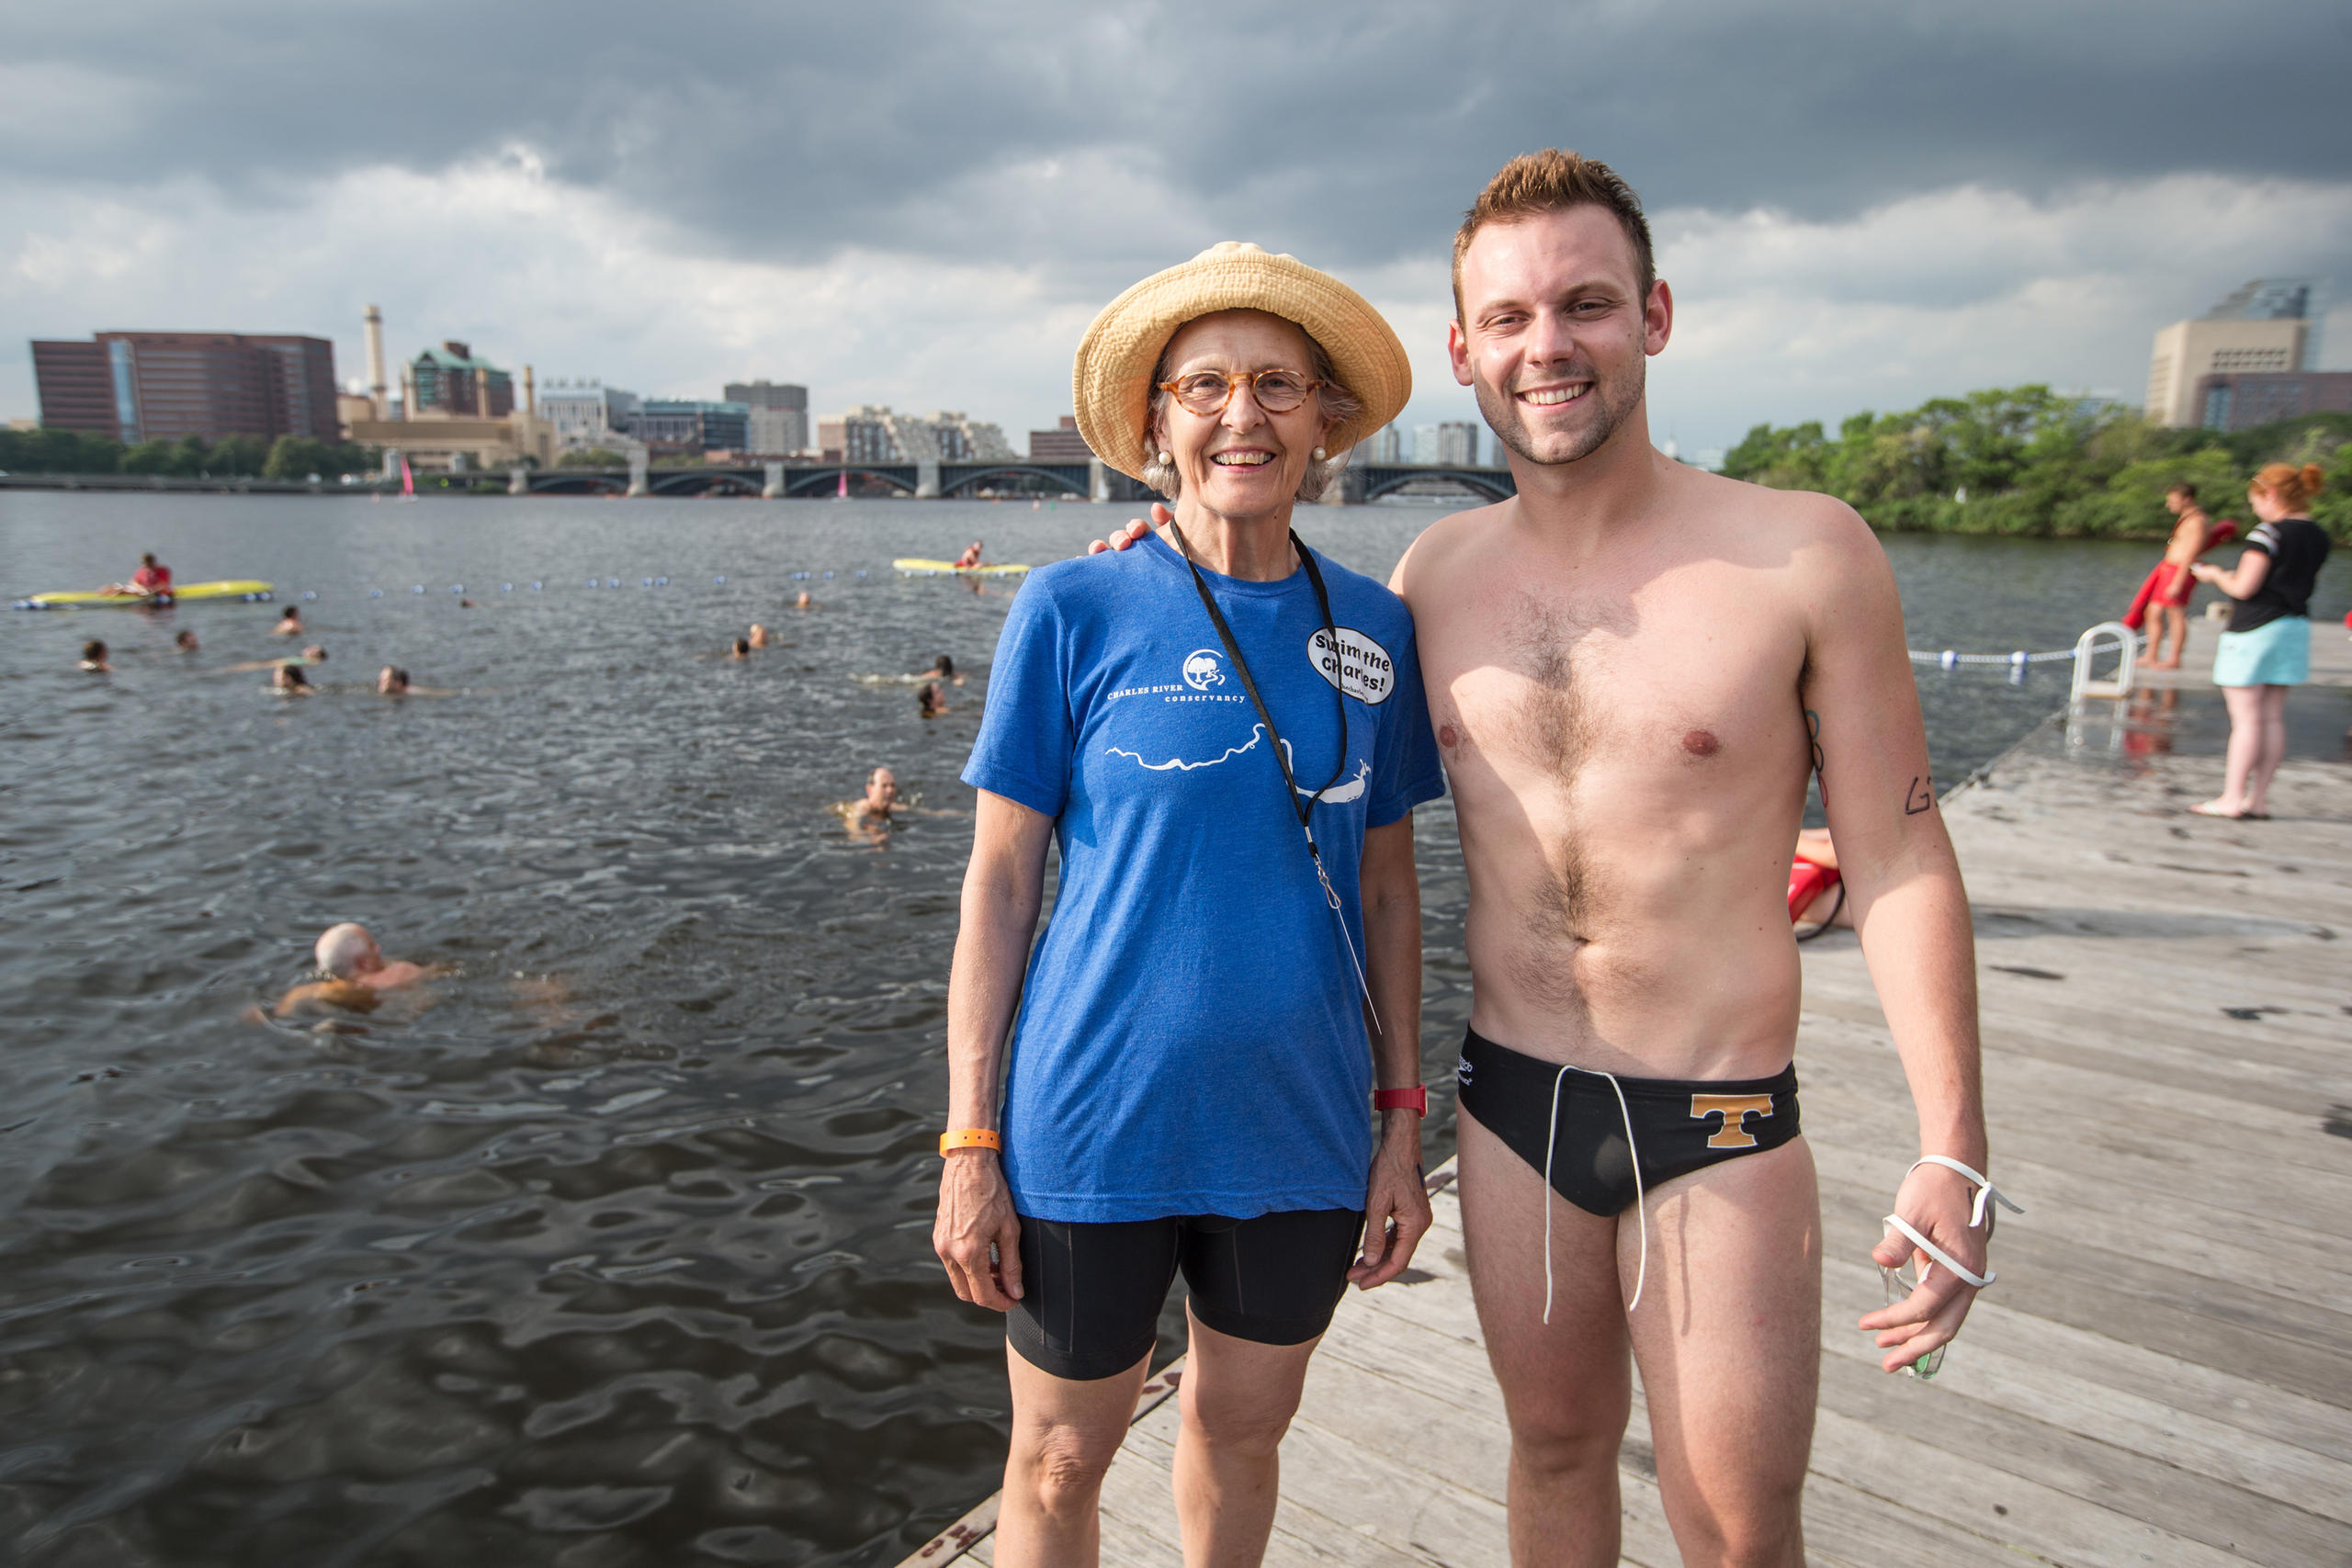 Woman and man photographed by the water with swimmers